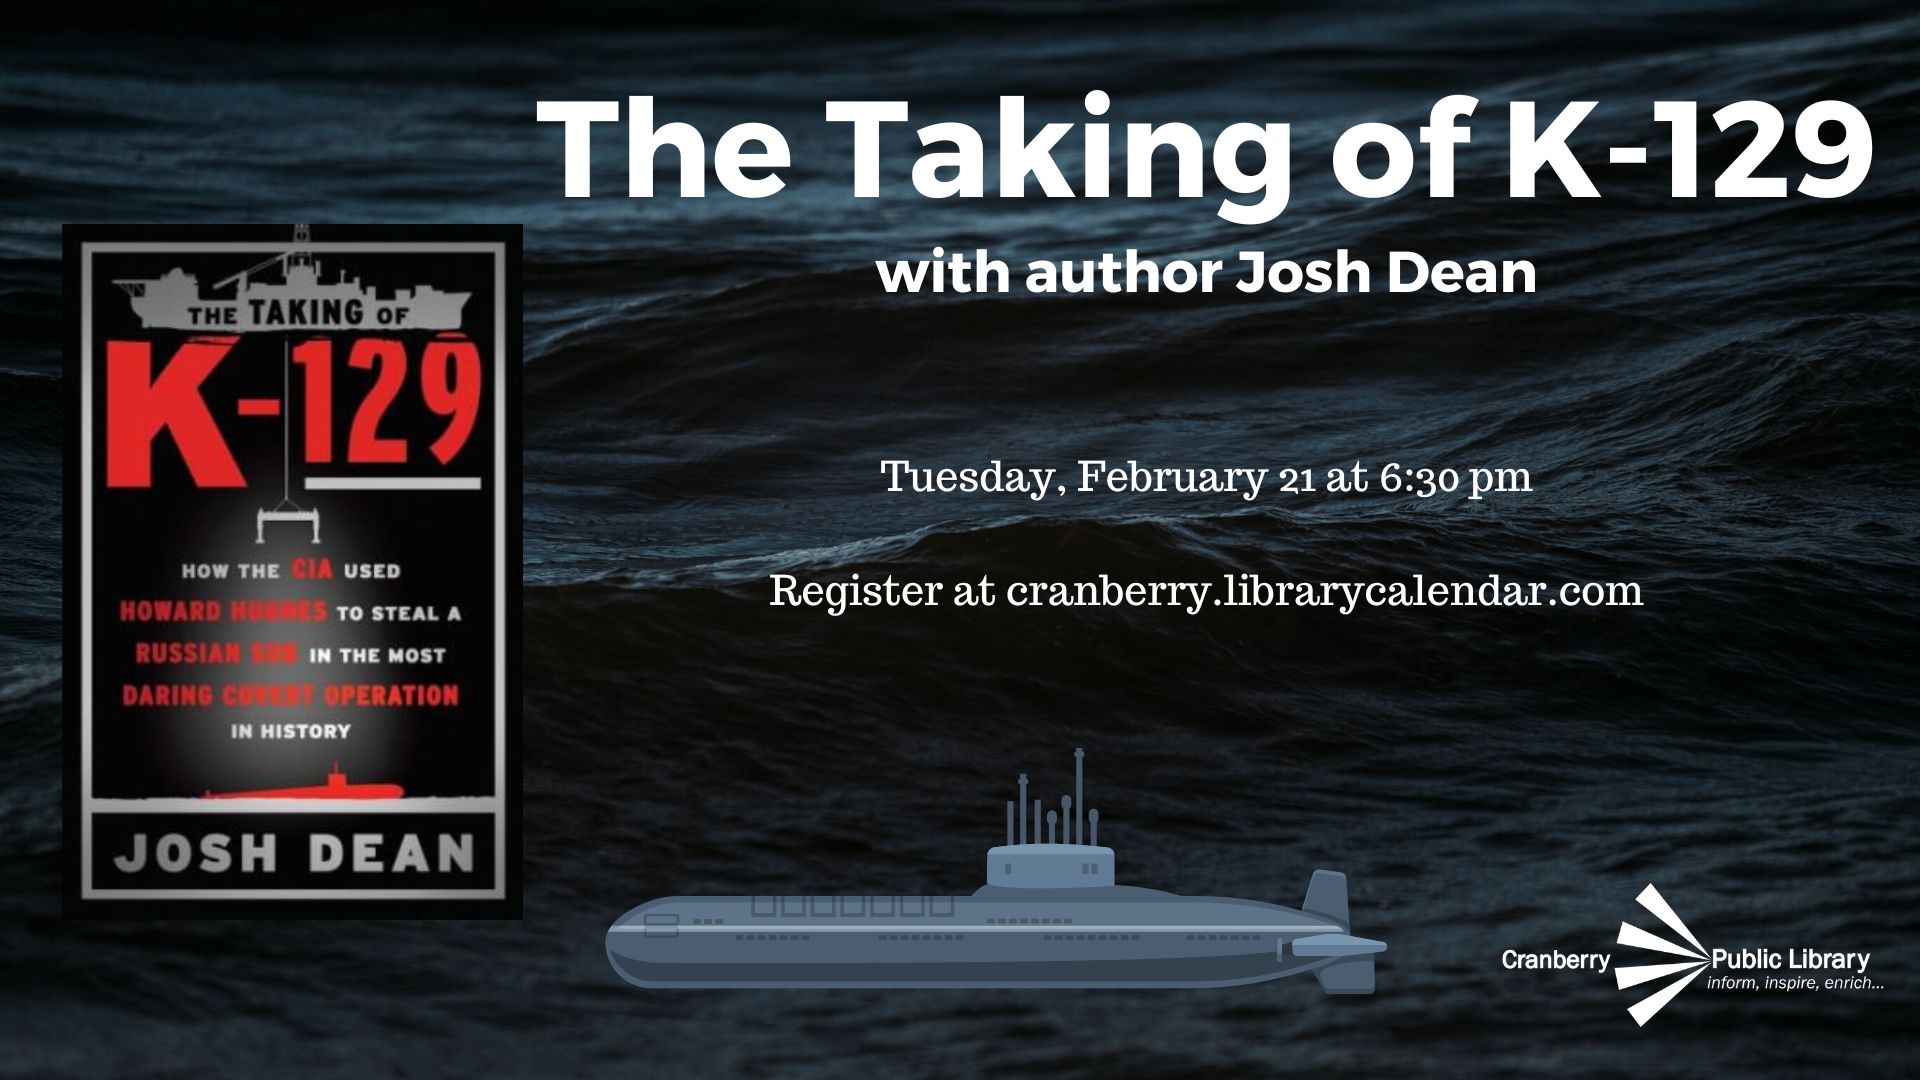 Flyer for The Taking of K-129 with image of a submarine